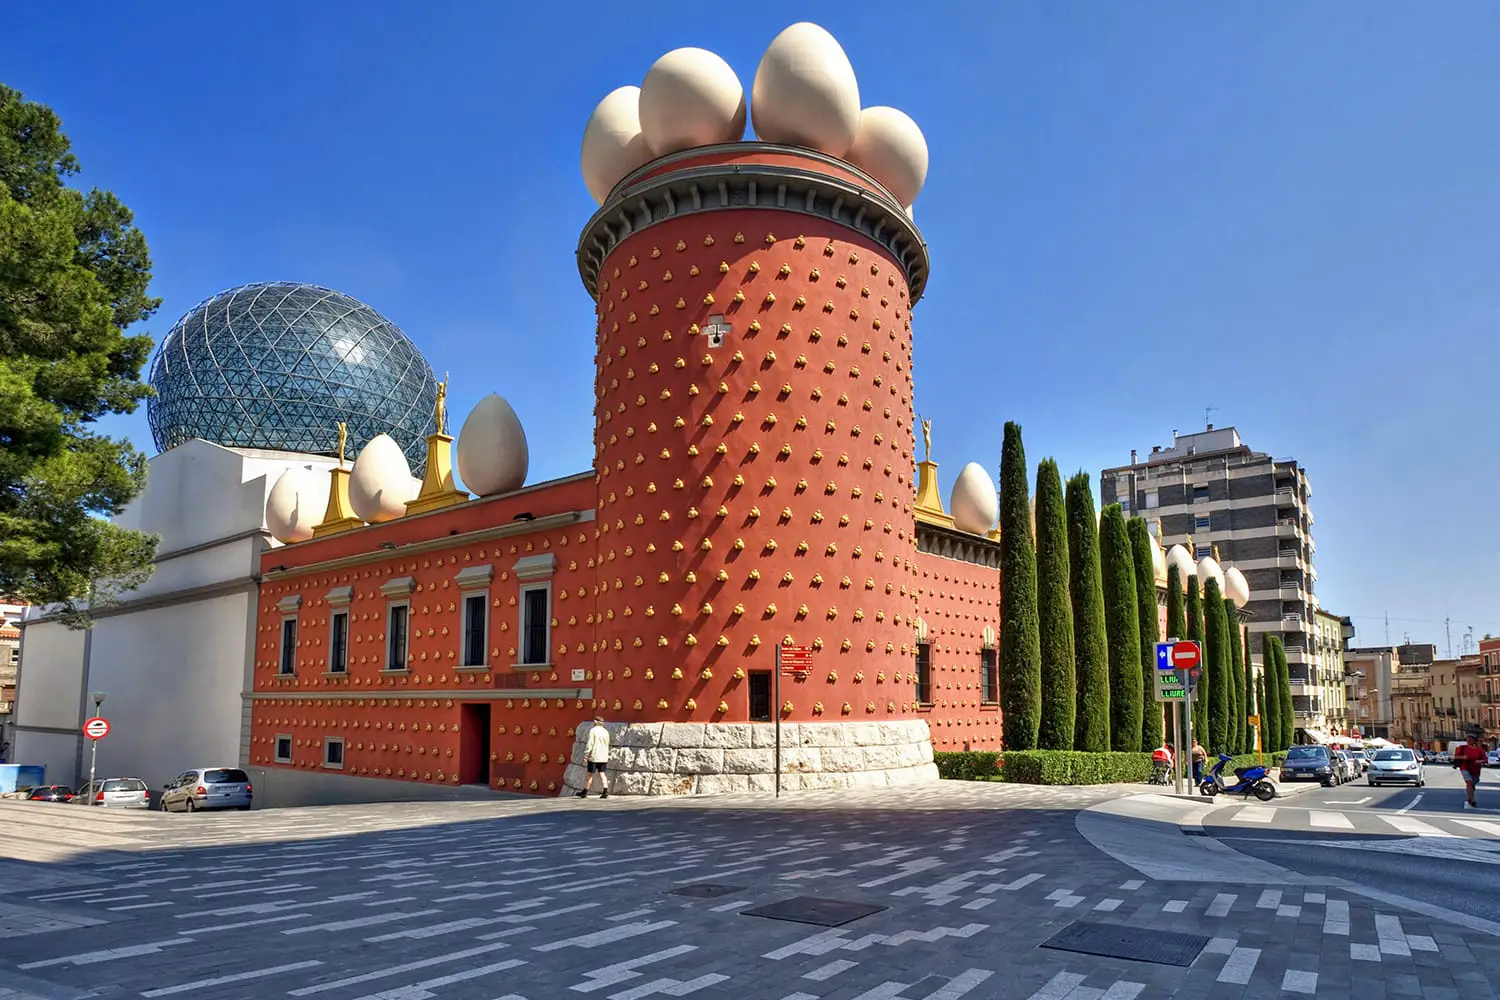 The Dali Theatre and Museum in Figueres, Spain